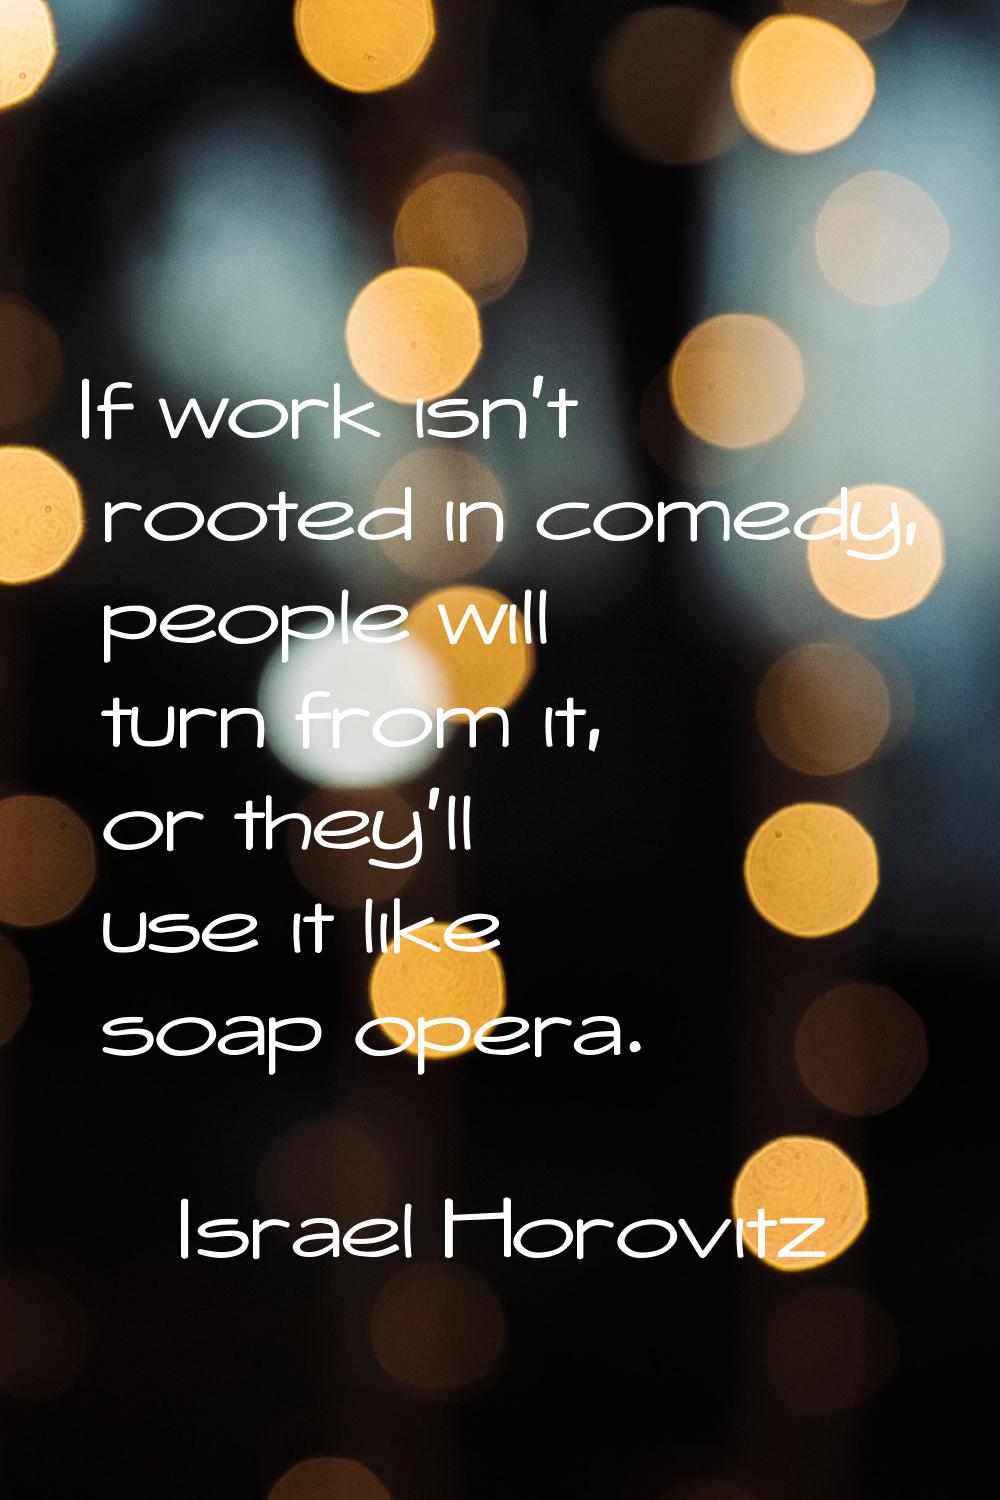 If work isn't rooted in comedy, people will turn from it, or they'll use it like soap opera.